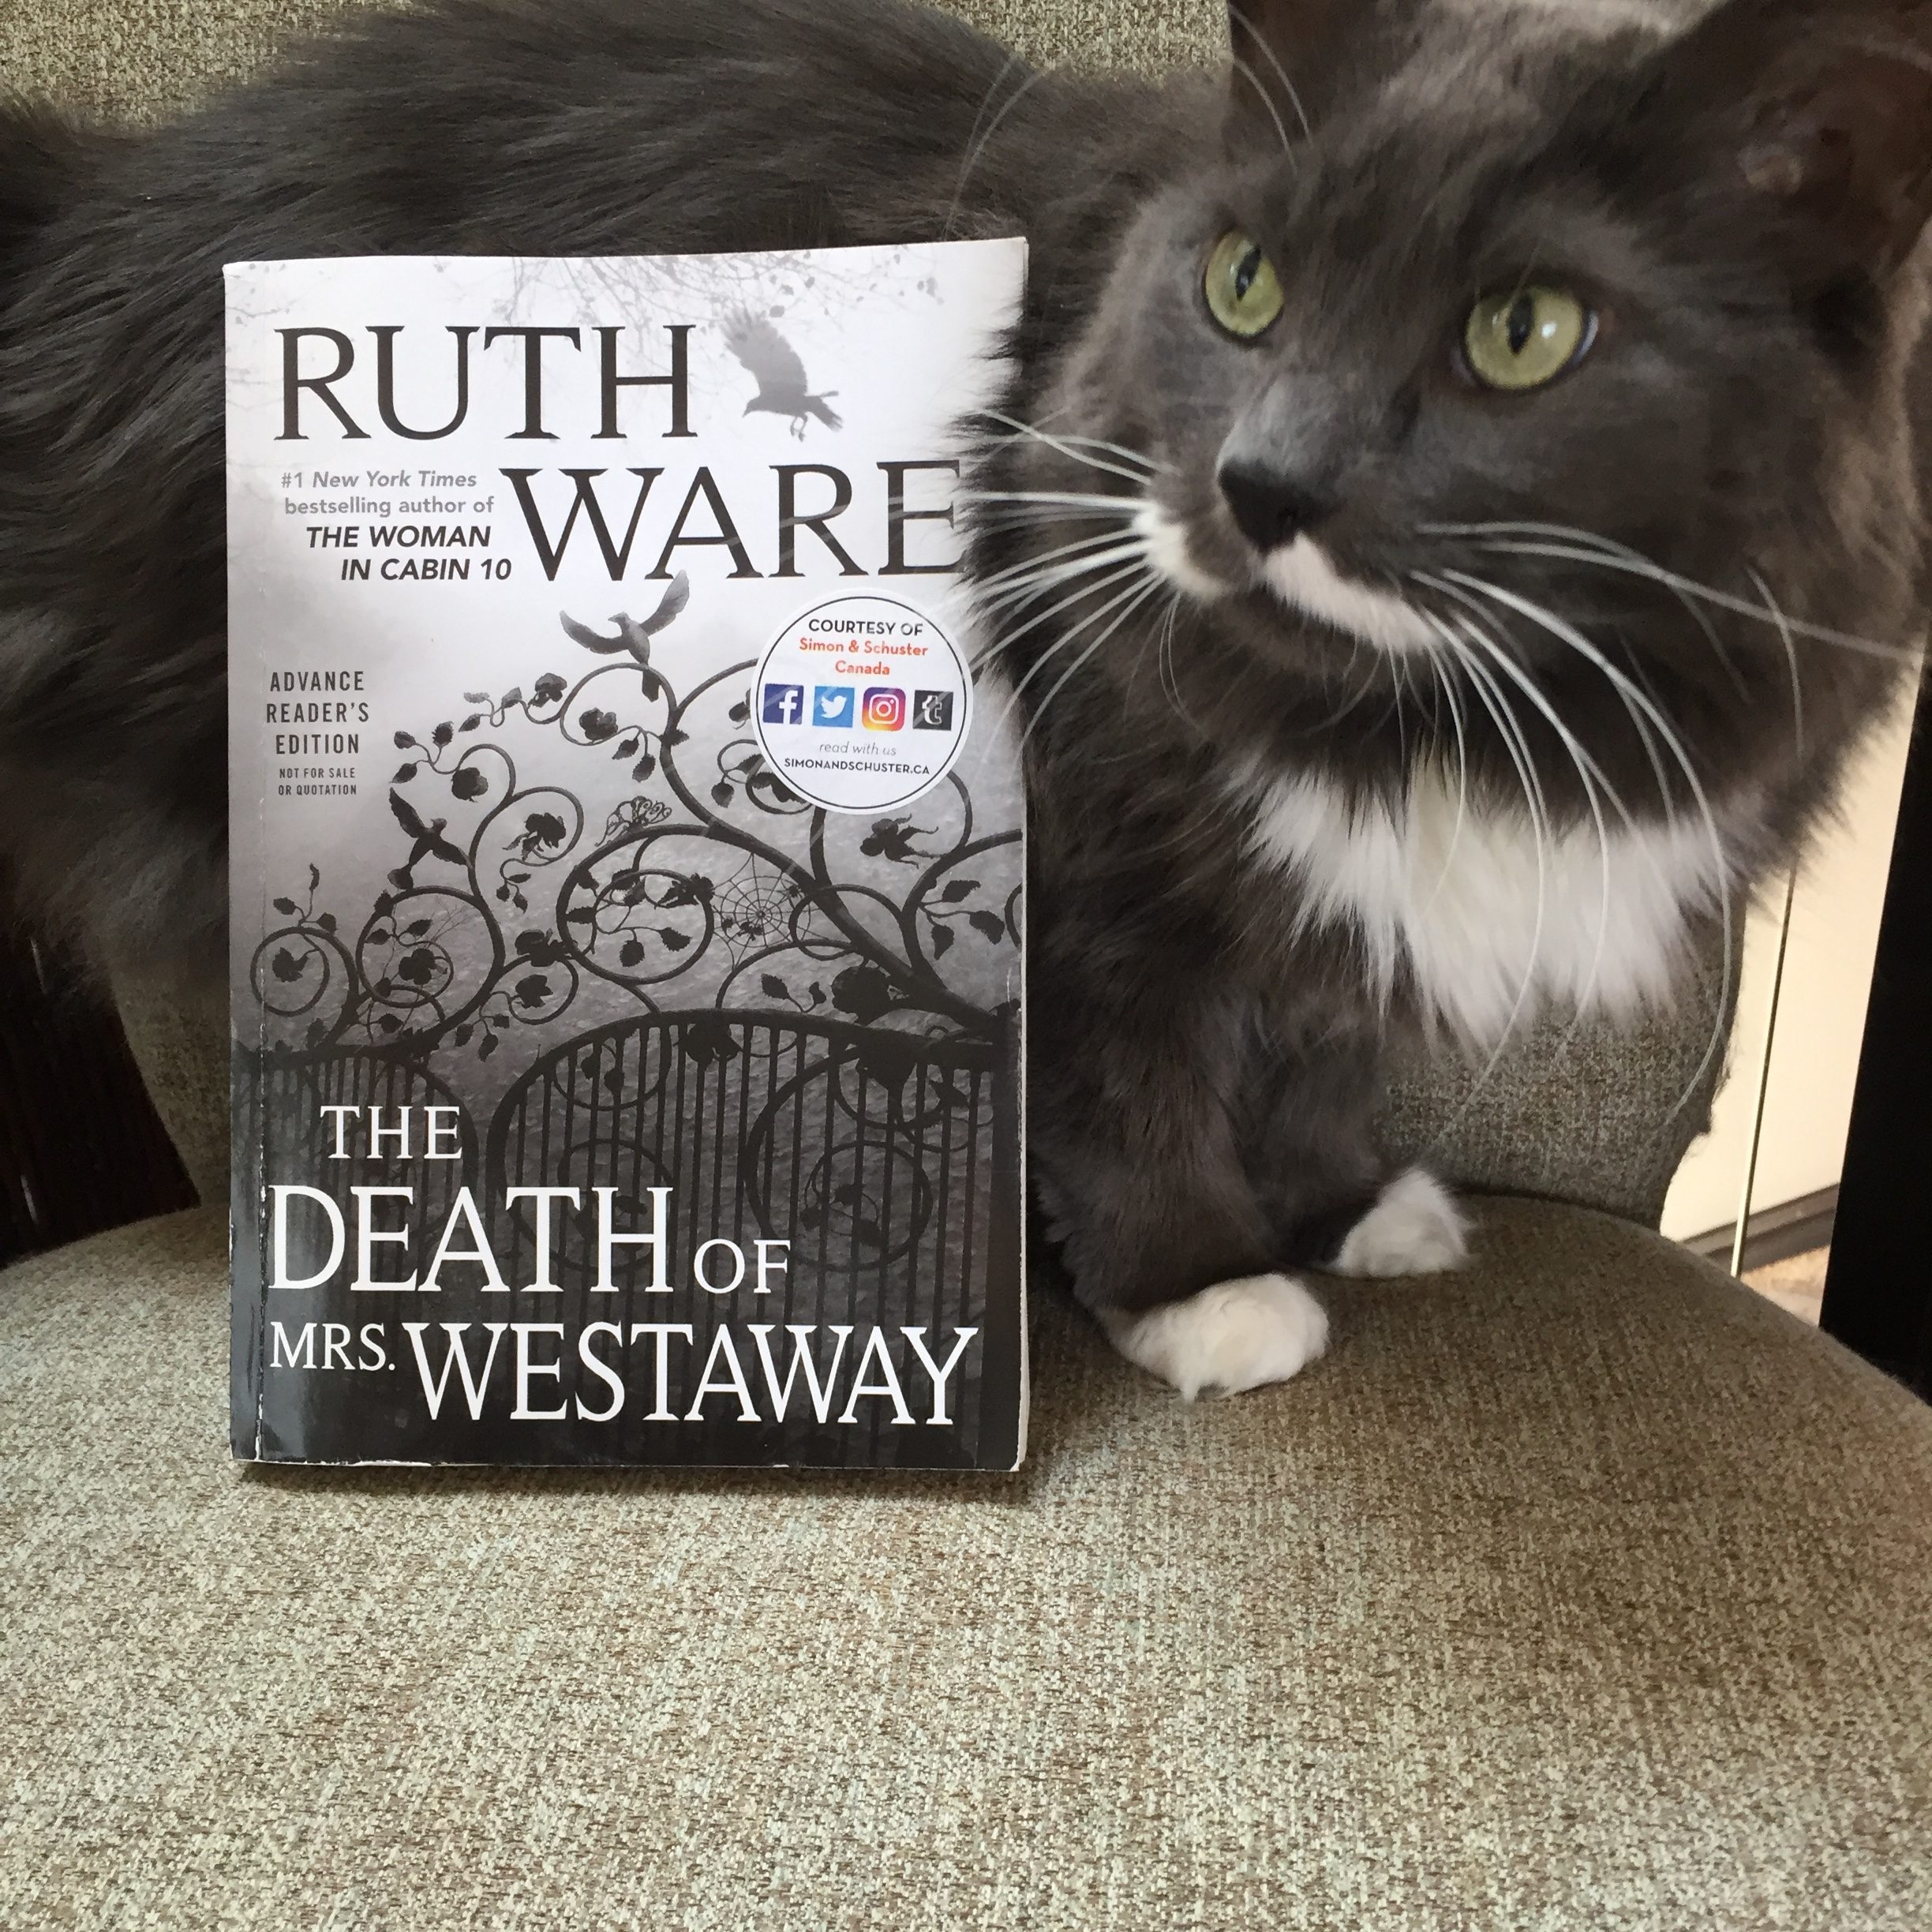 the book The Death of Mrs. Westaway by Ruth Ware, sitting upright against a grey and white longhaired cat